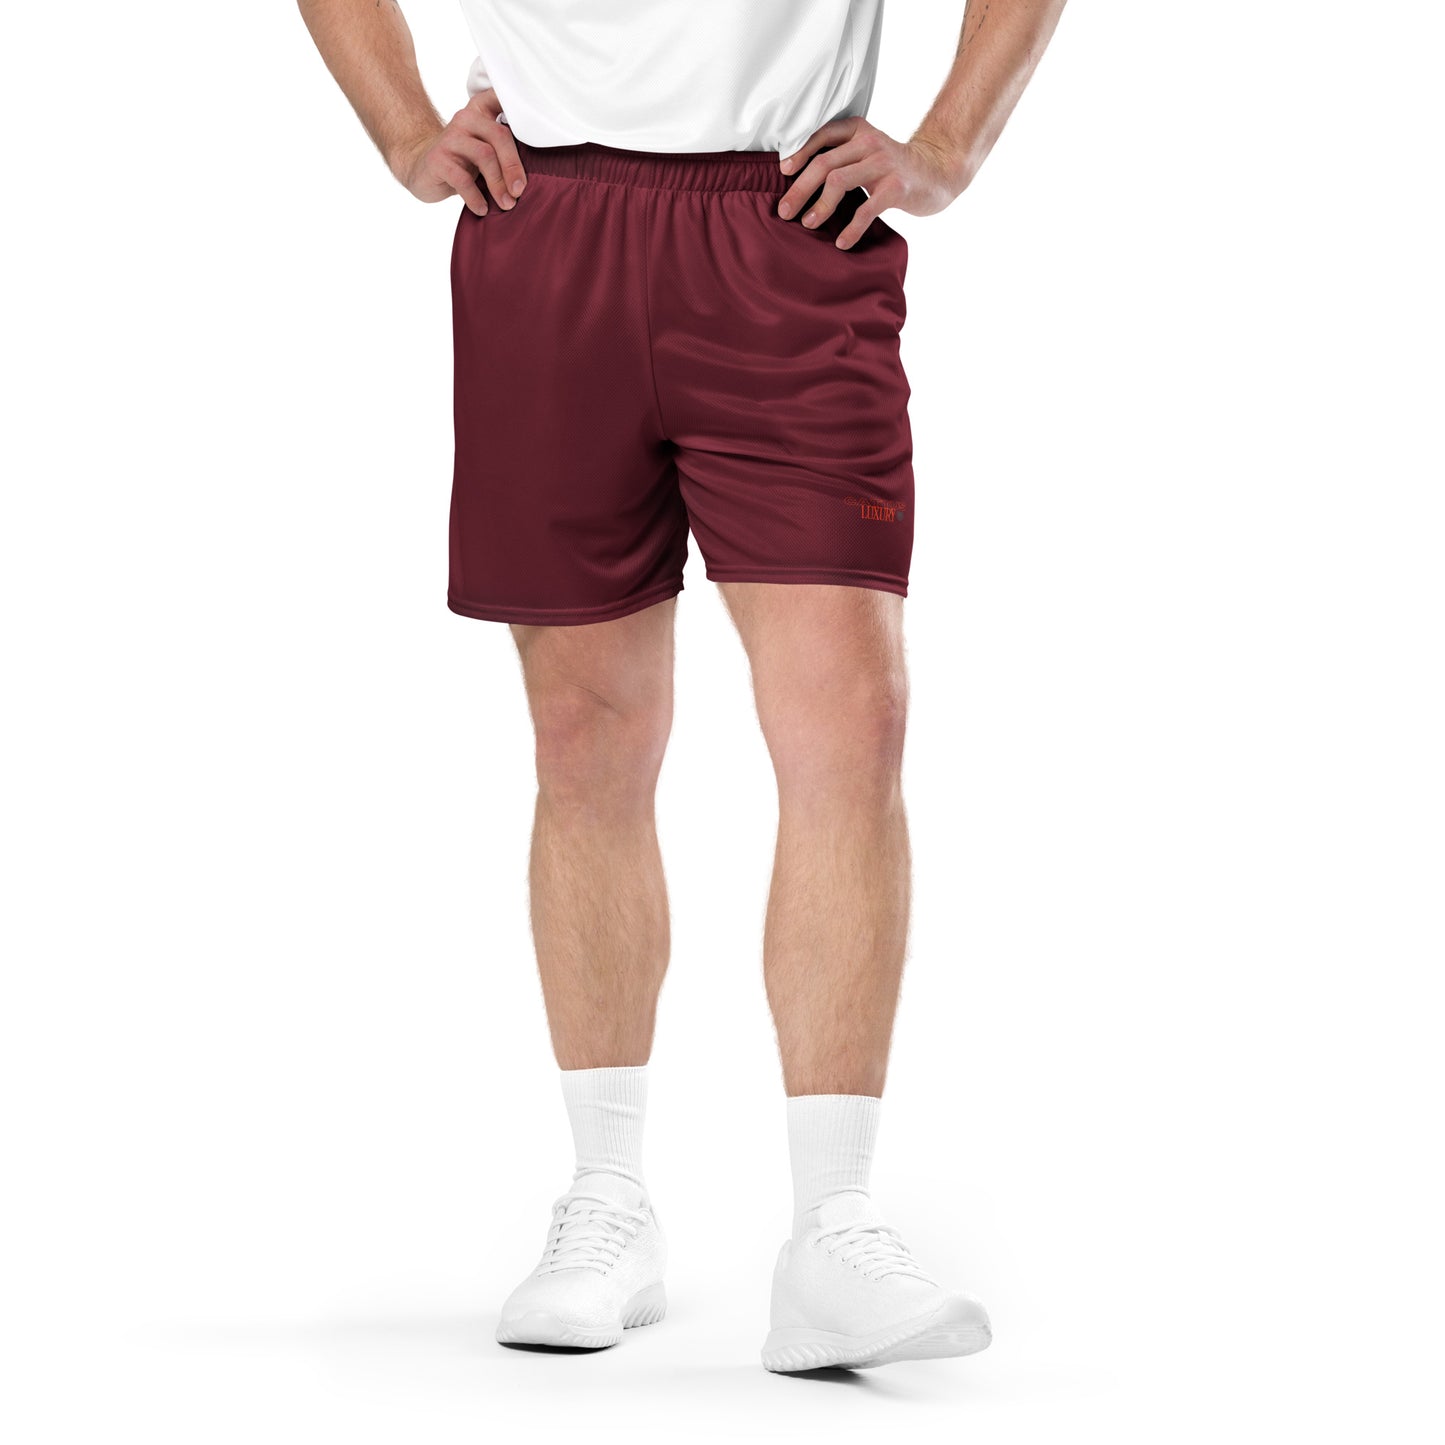 Aire Shorts - Burgundy